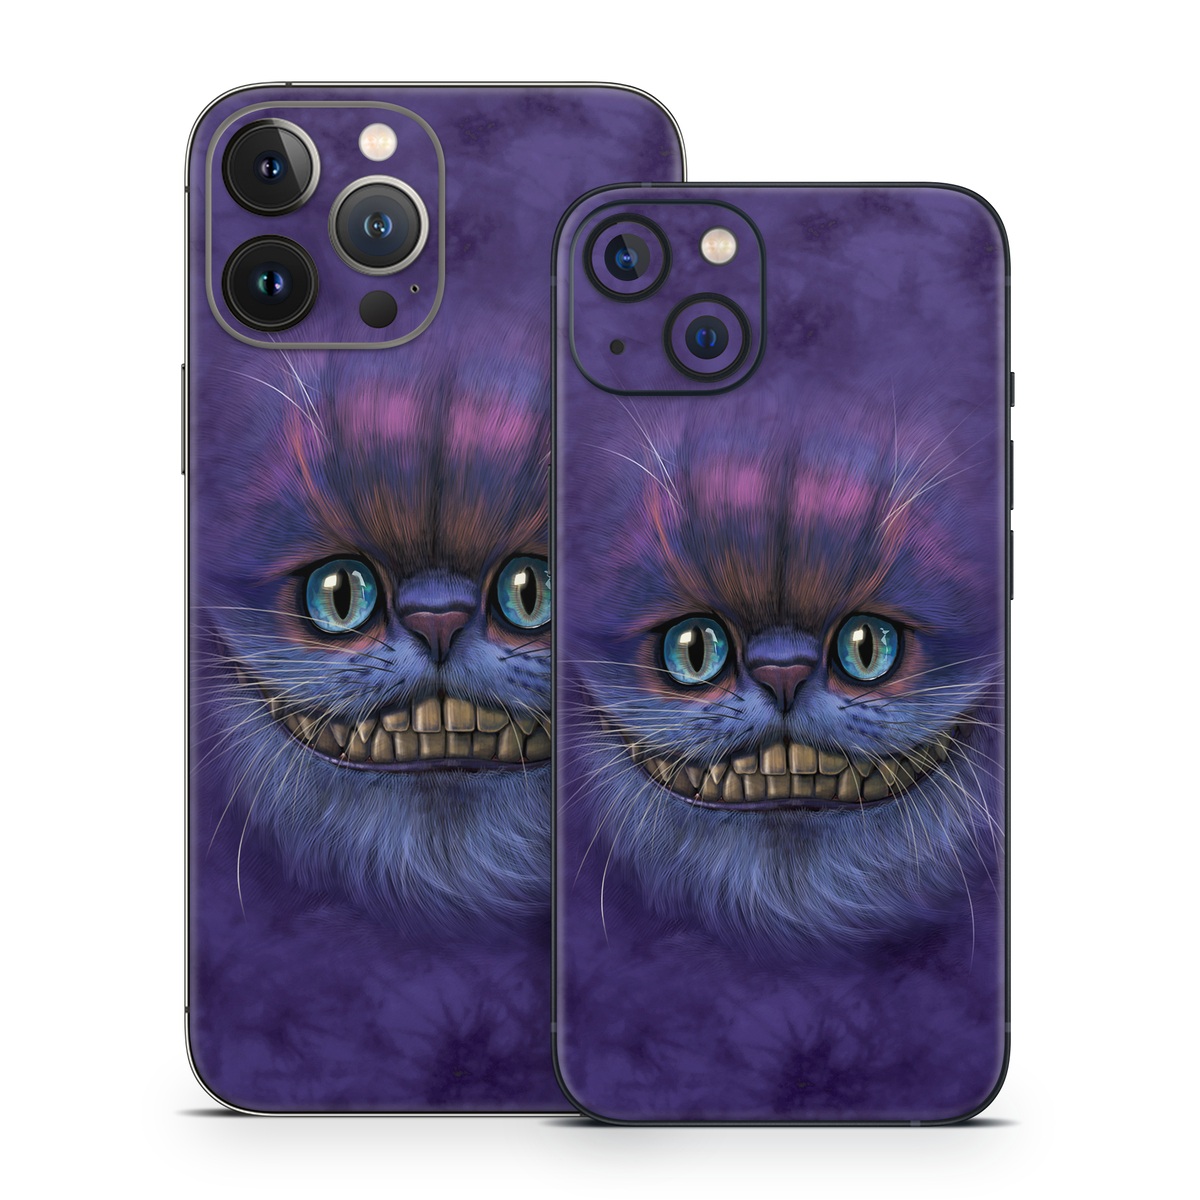 iPhone 13 Series Skin design of Cat, Whiskers, Felidae, Small to medium-sized cats, Snout, Eye, Illustration, Ojos azules, Black cat, Carnivore, with purple, blue colors